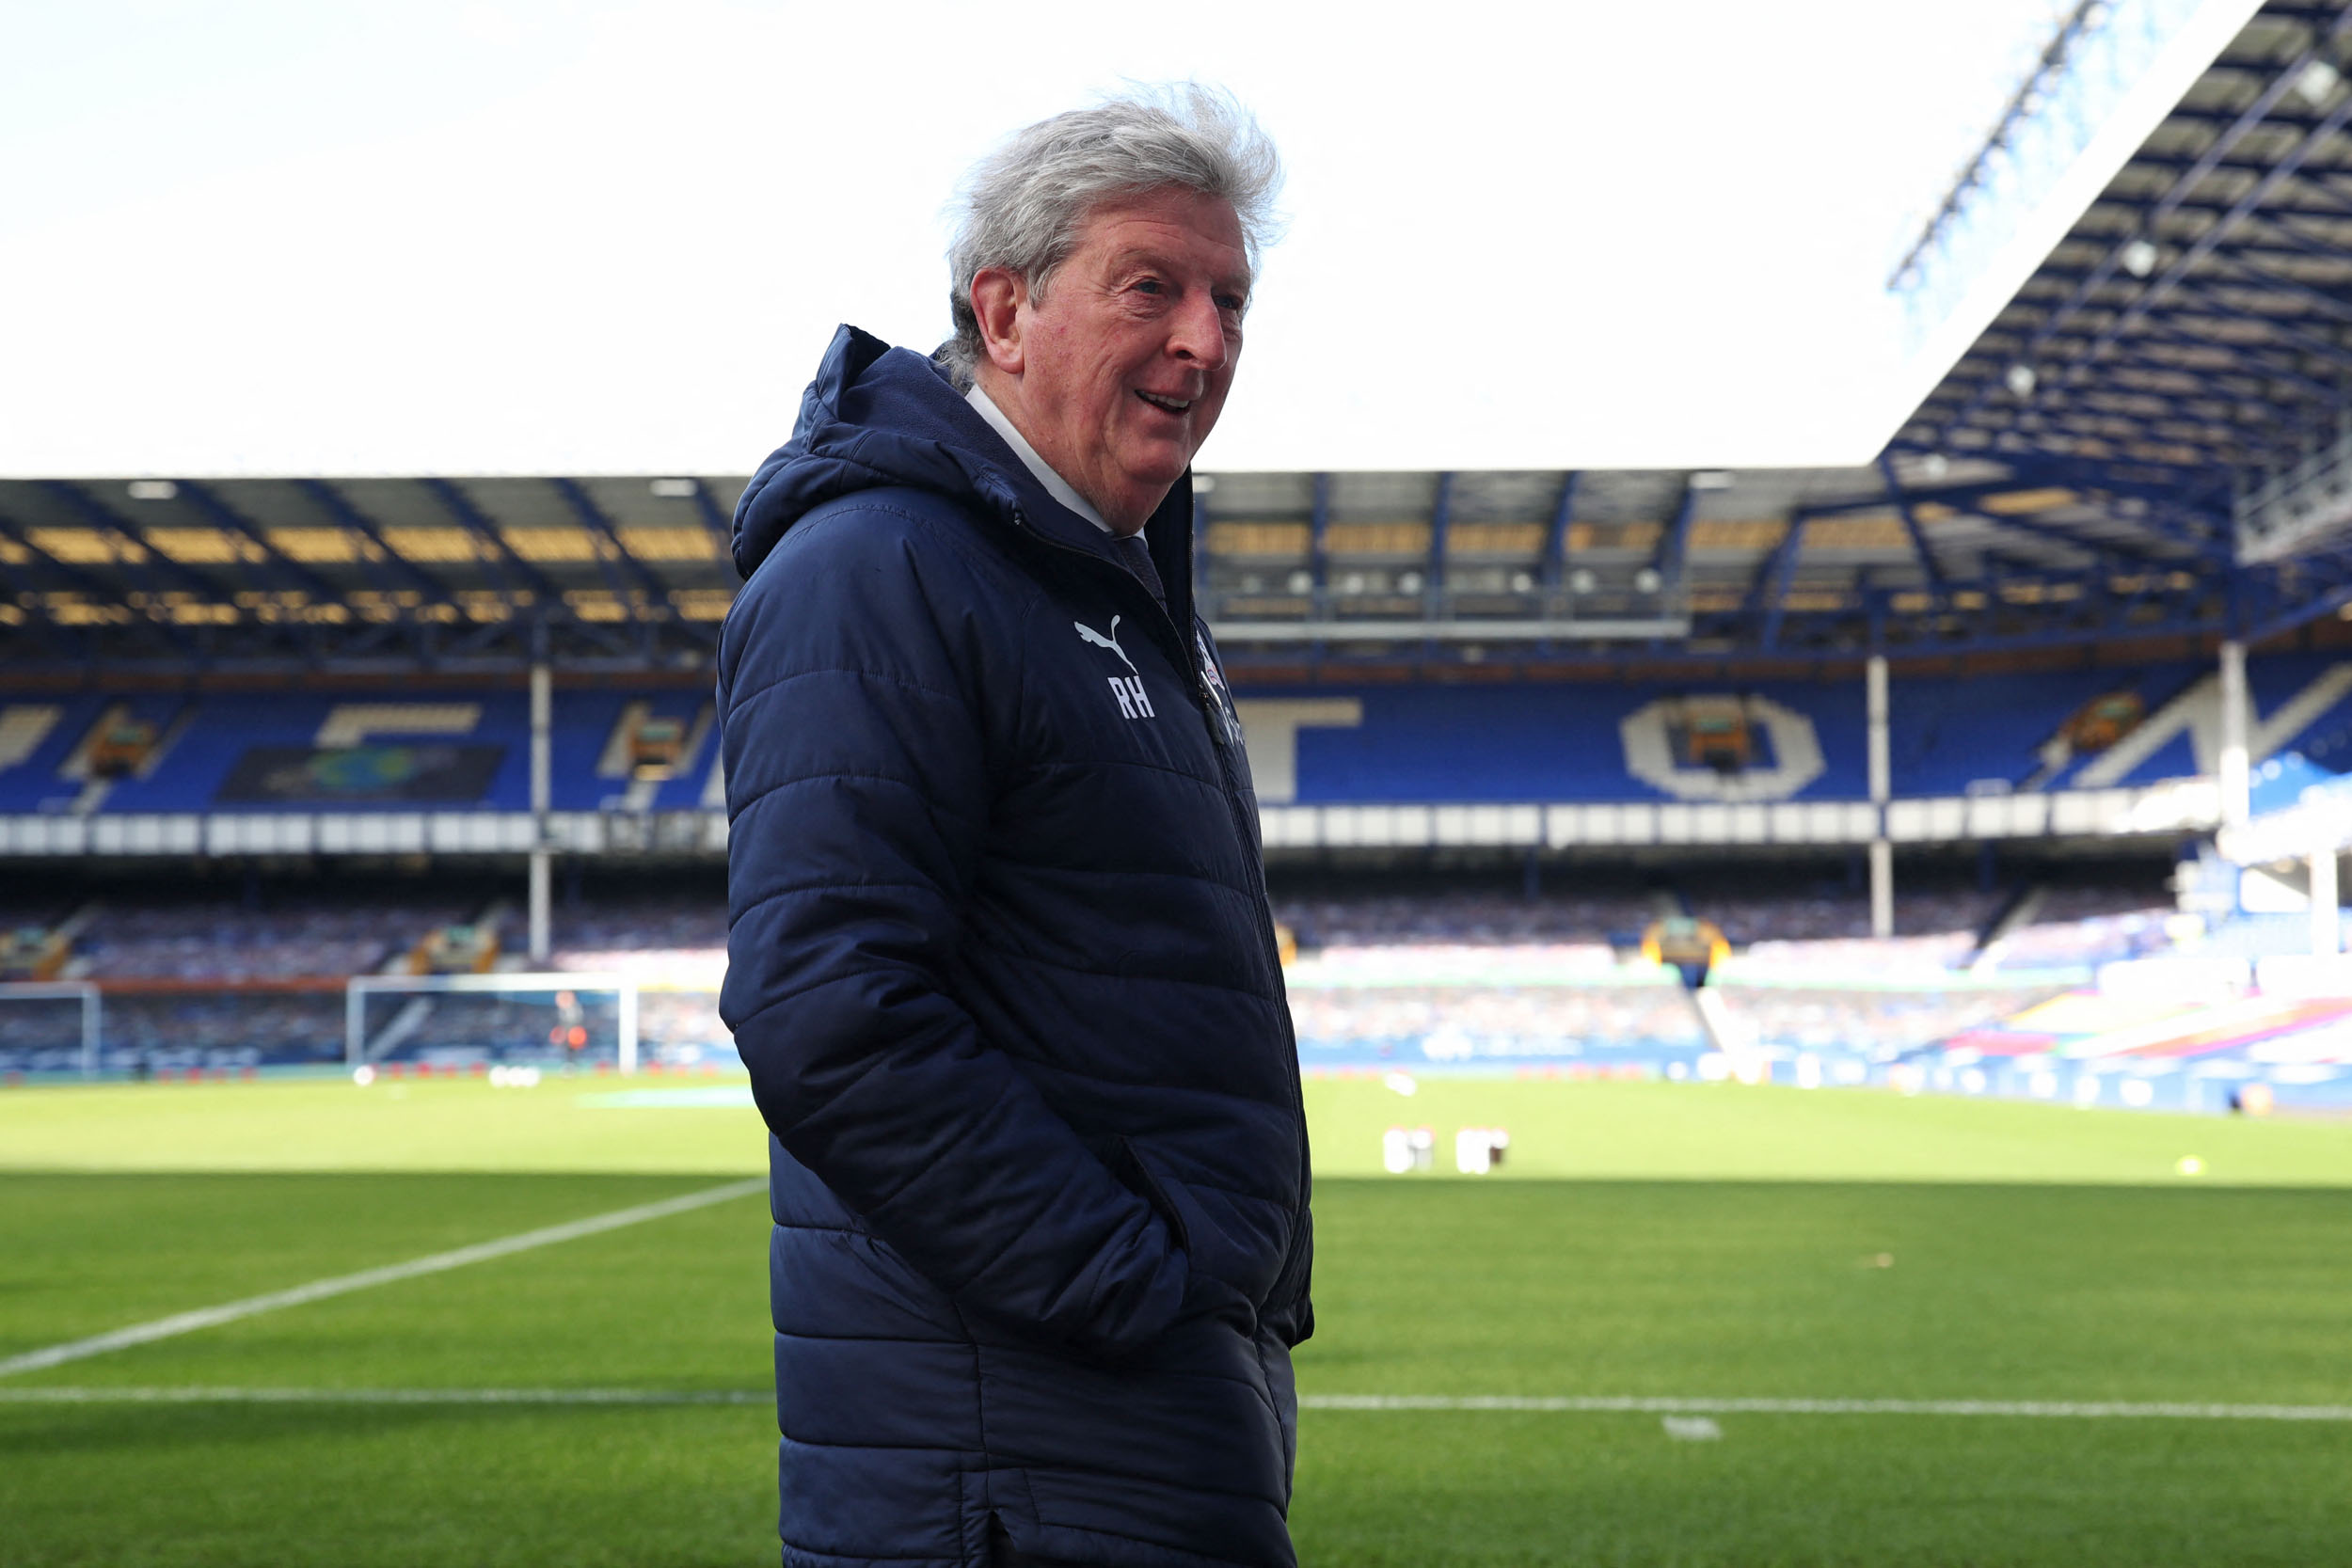 Crystal Palace's English manager Roy Hodgson checks out the conditions ahead of the English Premier League football match between Everton and Crystal Palace at Goodison Park in Liverpool, north west England on April 5, 2021. (Photo by Clive Brunskill / POOL / AFP) / RESTRICTED TO EDITORIAL USE. No use with unauthorized audio, video, data, fixture lists, club/league logos or 'live' services. Online in-match use limited to 120 images. An additional 40 images may be used in extra time. No video emulation. Social media in-match use limited to 120 images. An additional 40 images may be used in extra time. No use in betting publications, games or single club/league/player publications. /